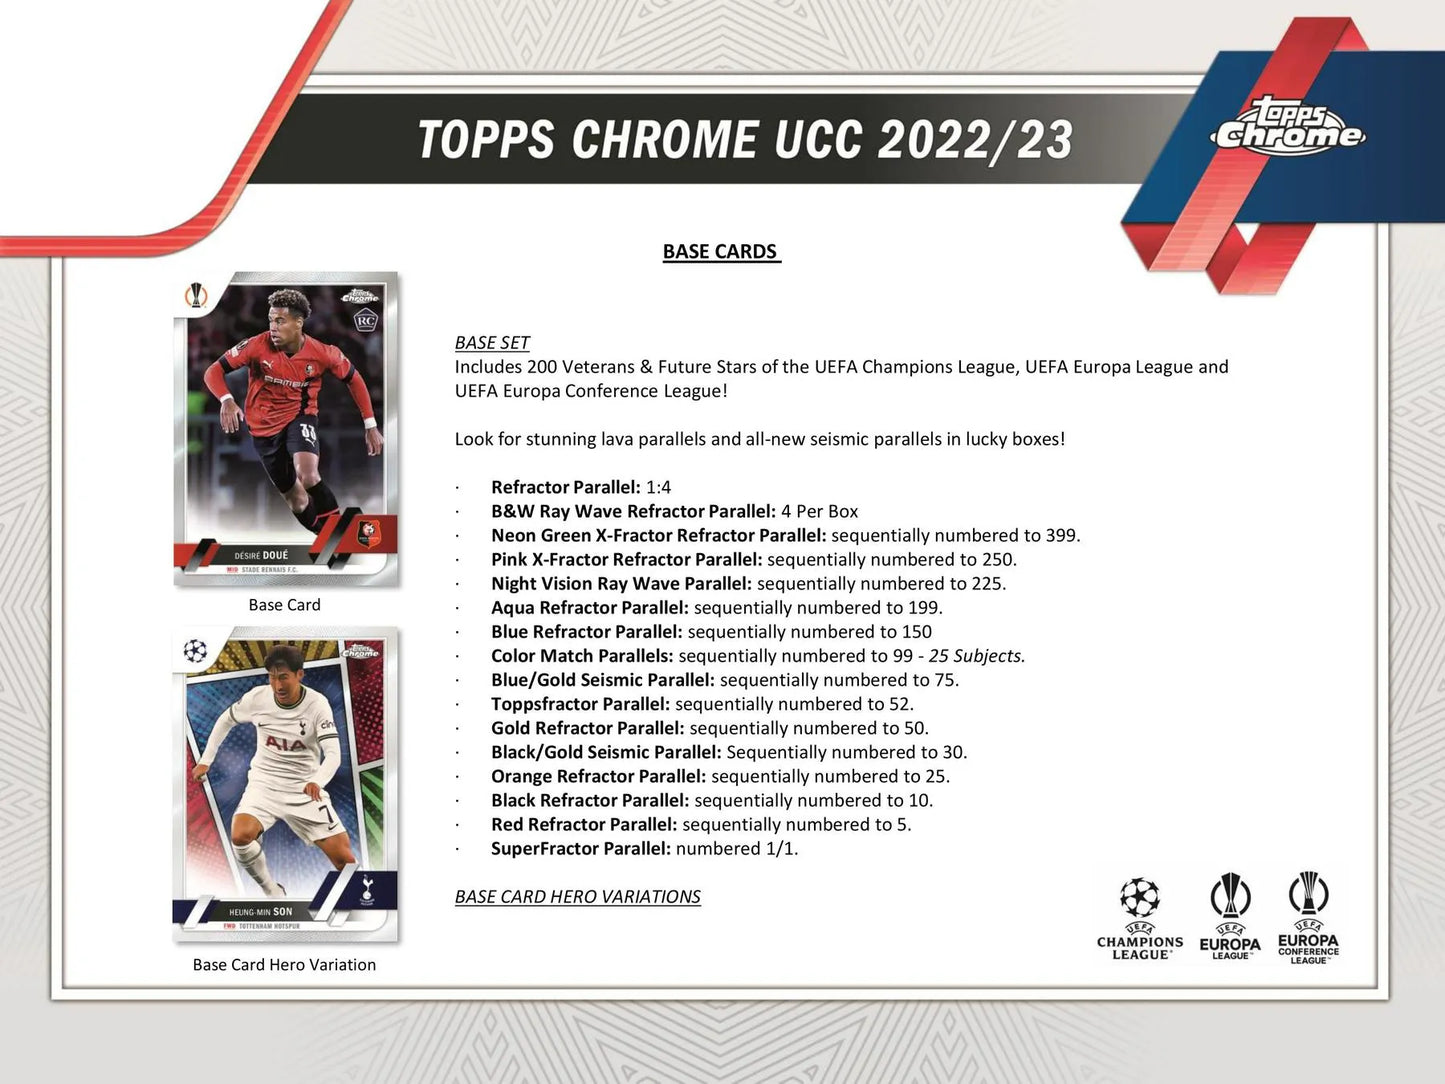 2022/23 Topps Chrome UEFA Club Competitions Soccer Hobby LITE Pack